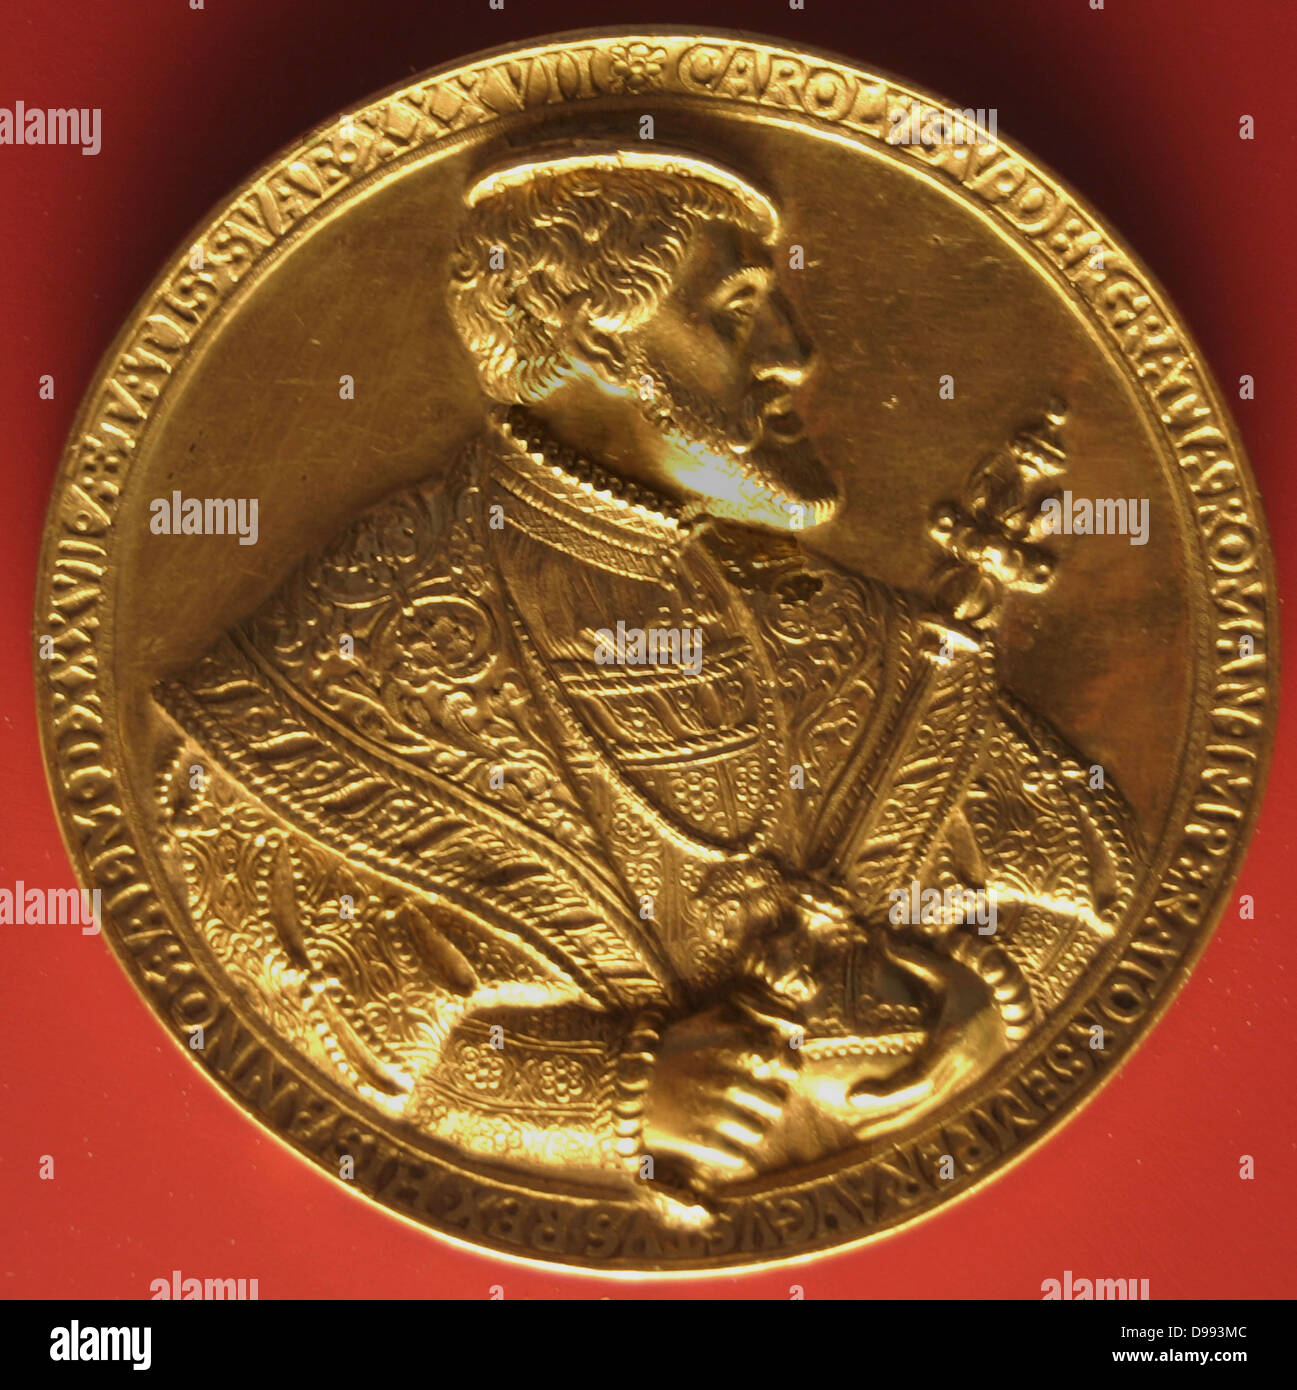 Charles V depicted on a gold coin. (Carlos I, Carlos V or 'Carlos I de España), 1500 – 1558)ruler of the Holy Roman Empire from 1519 and, as Carlos I of Spain, of the Spanish Empire from 1516 until his abdication in 1556. Stock Photo